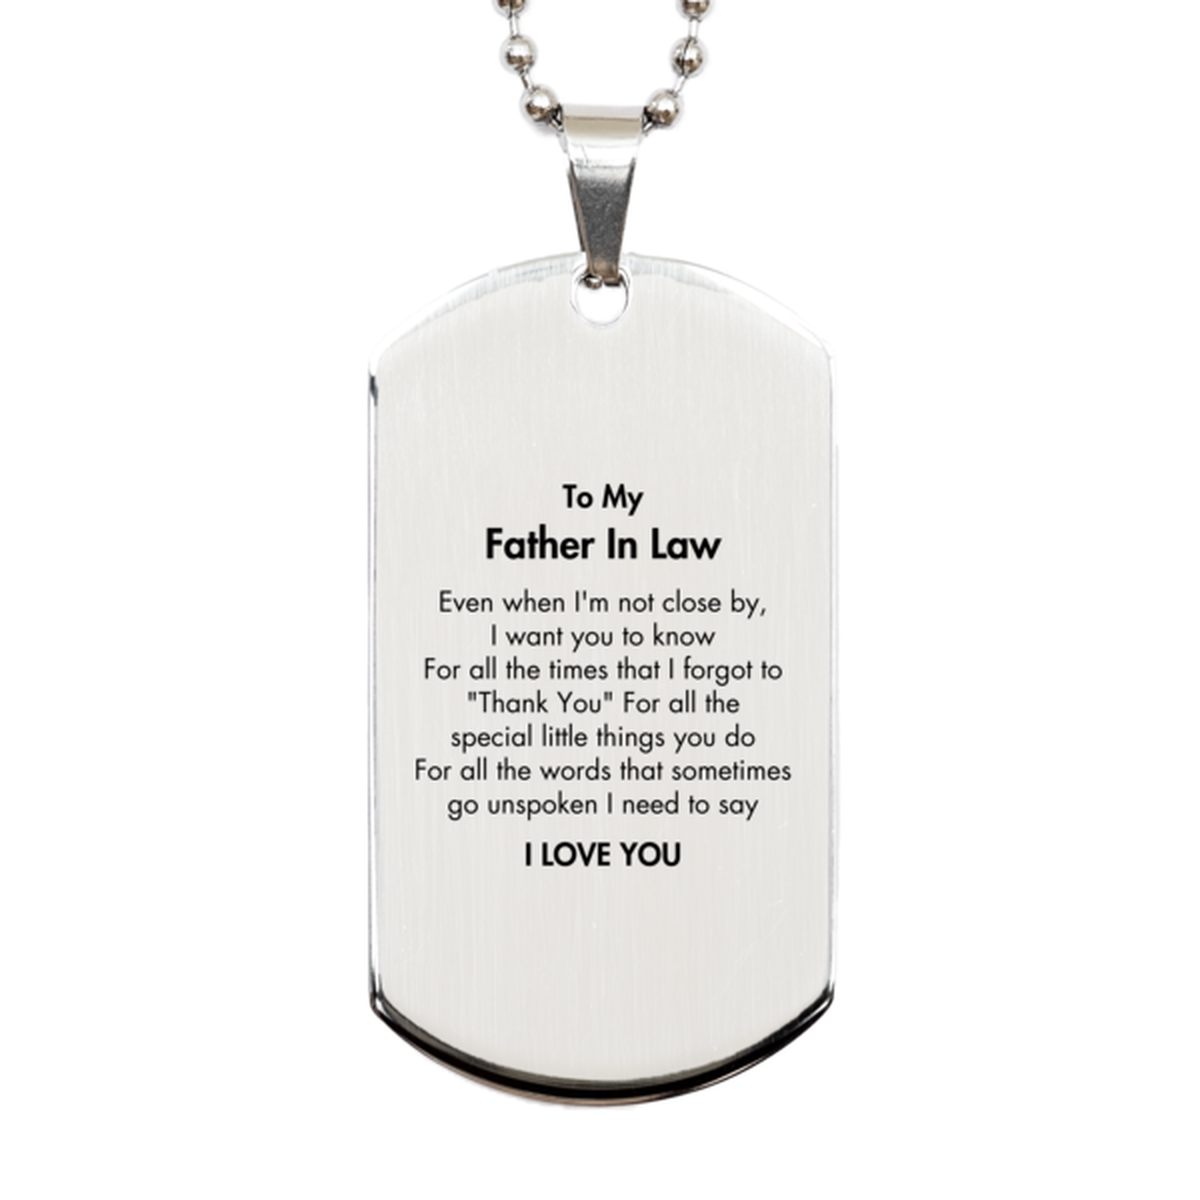 Thank You Gifts for Father In Law, Keepsake Silver Dog Tag Gifts for Father In Law Birthday Mother's day Father's Day Father In Law For all the words That sometimes go unspoken I need to say I LOVE YOU